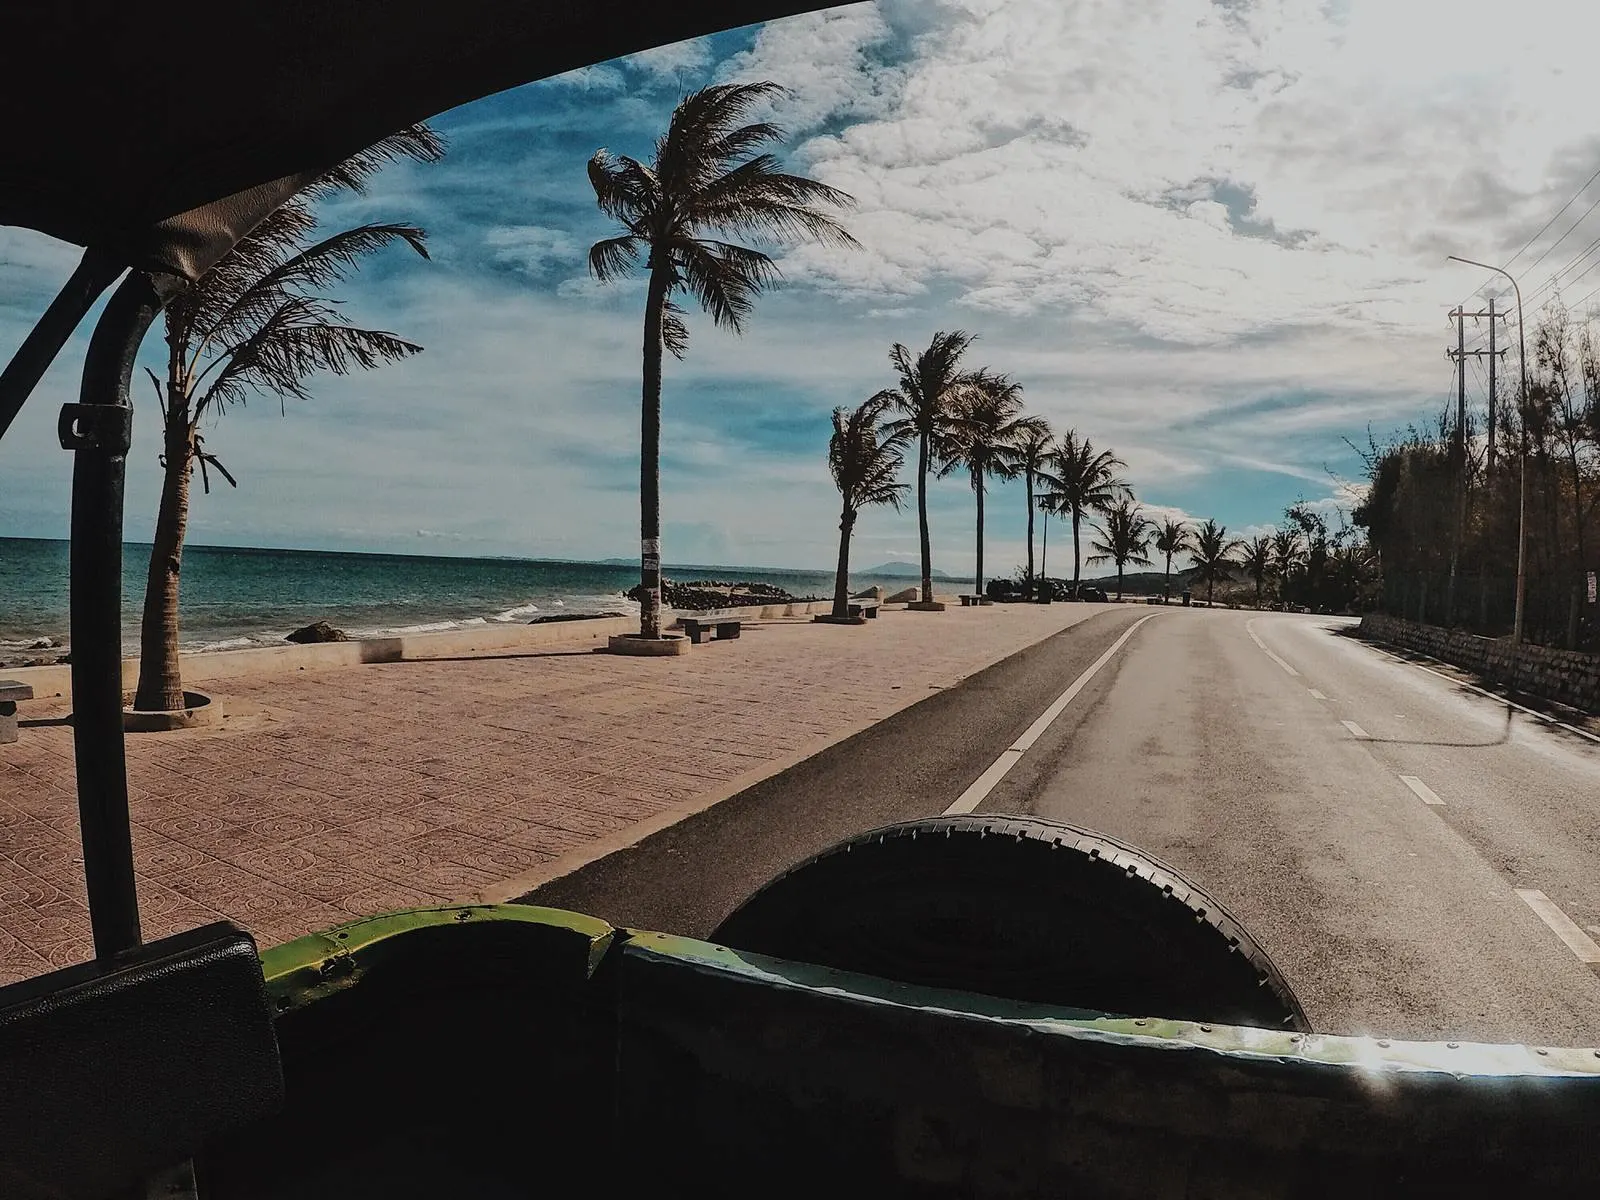 Driving along the beach on a jeep!